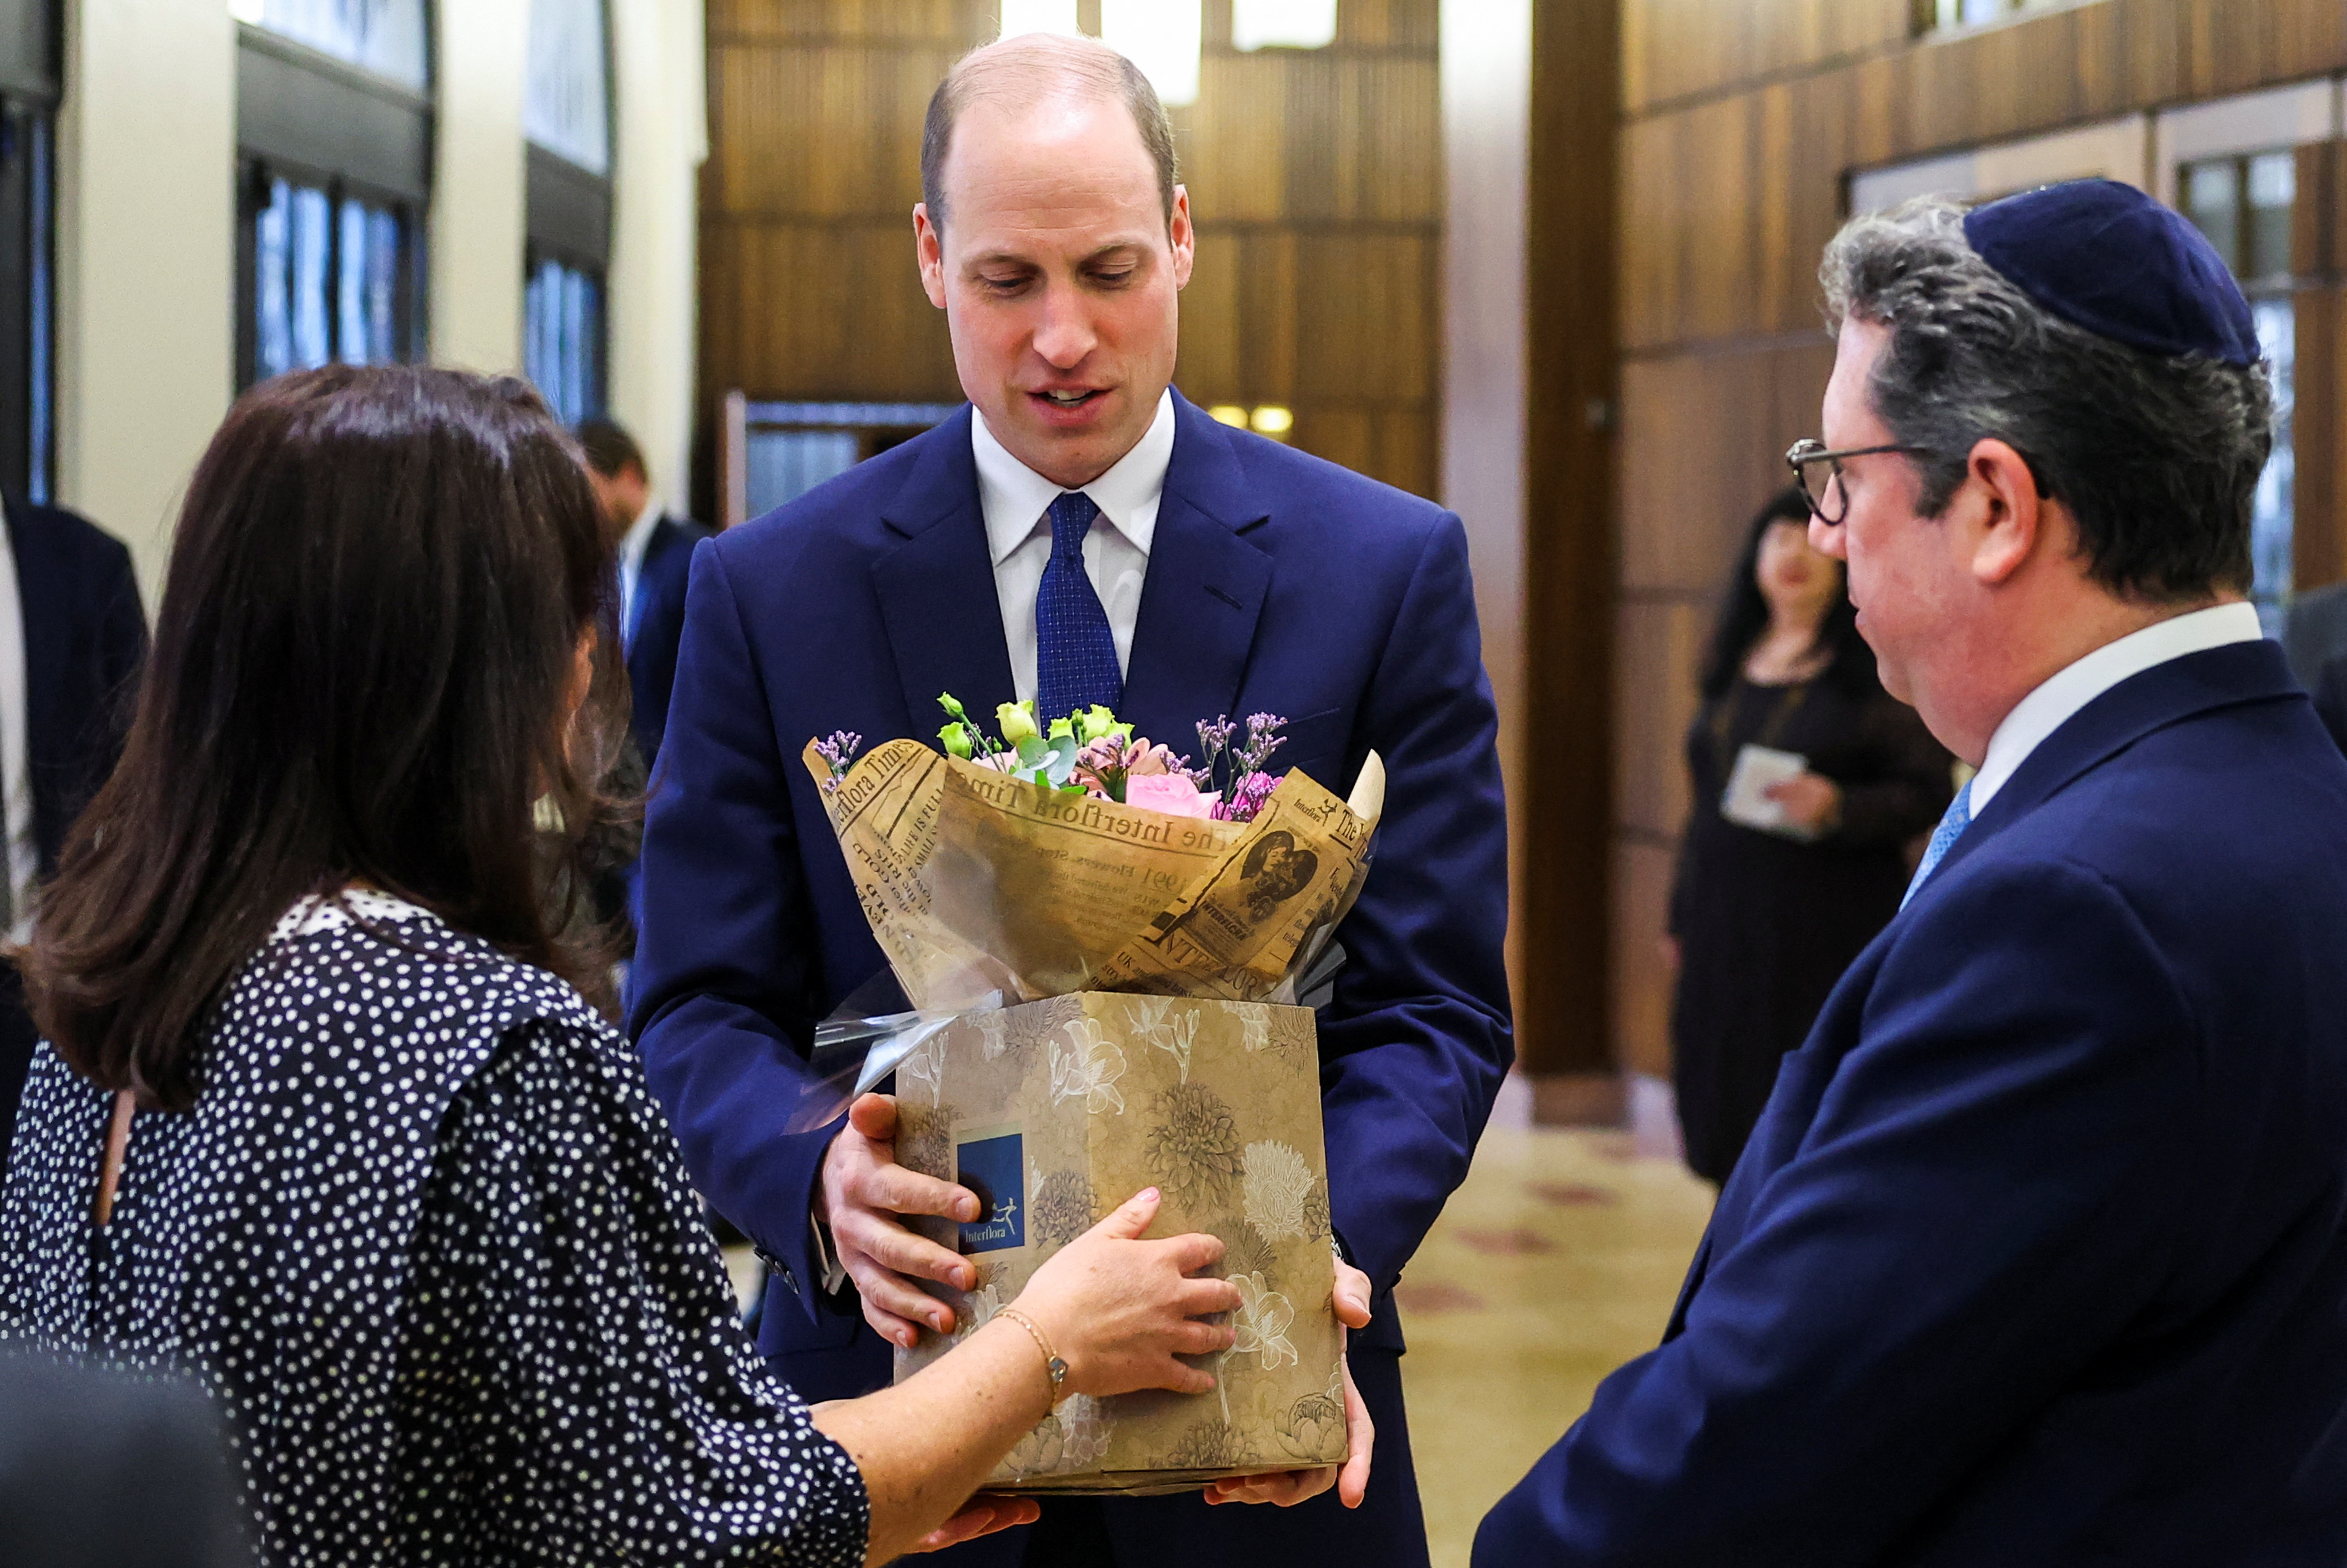 LONDON, ENGLAND - FEBRUARY 29: Britain's Prince William, Prince of Wales speaks receives a bouquet of flowers for his wife Catherine, Princess of Wales during a visit to the Western Marble Arch Synagogue on February 29, 2024 in London, England. (phot by Toby Melville - WPA Pool/Getty Images)